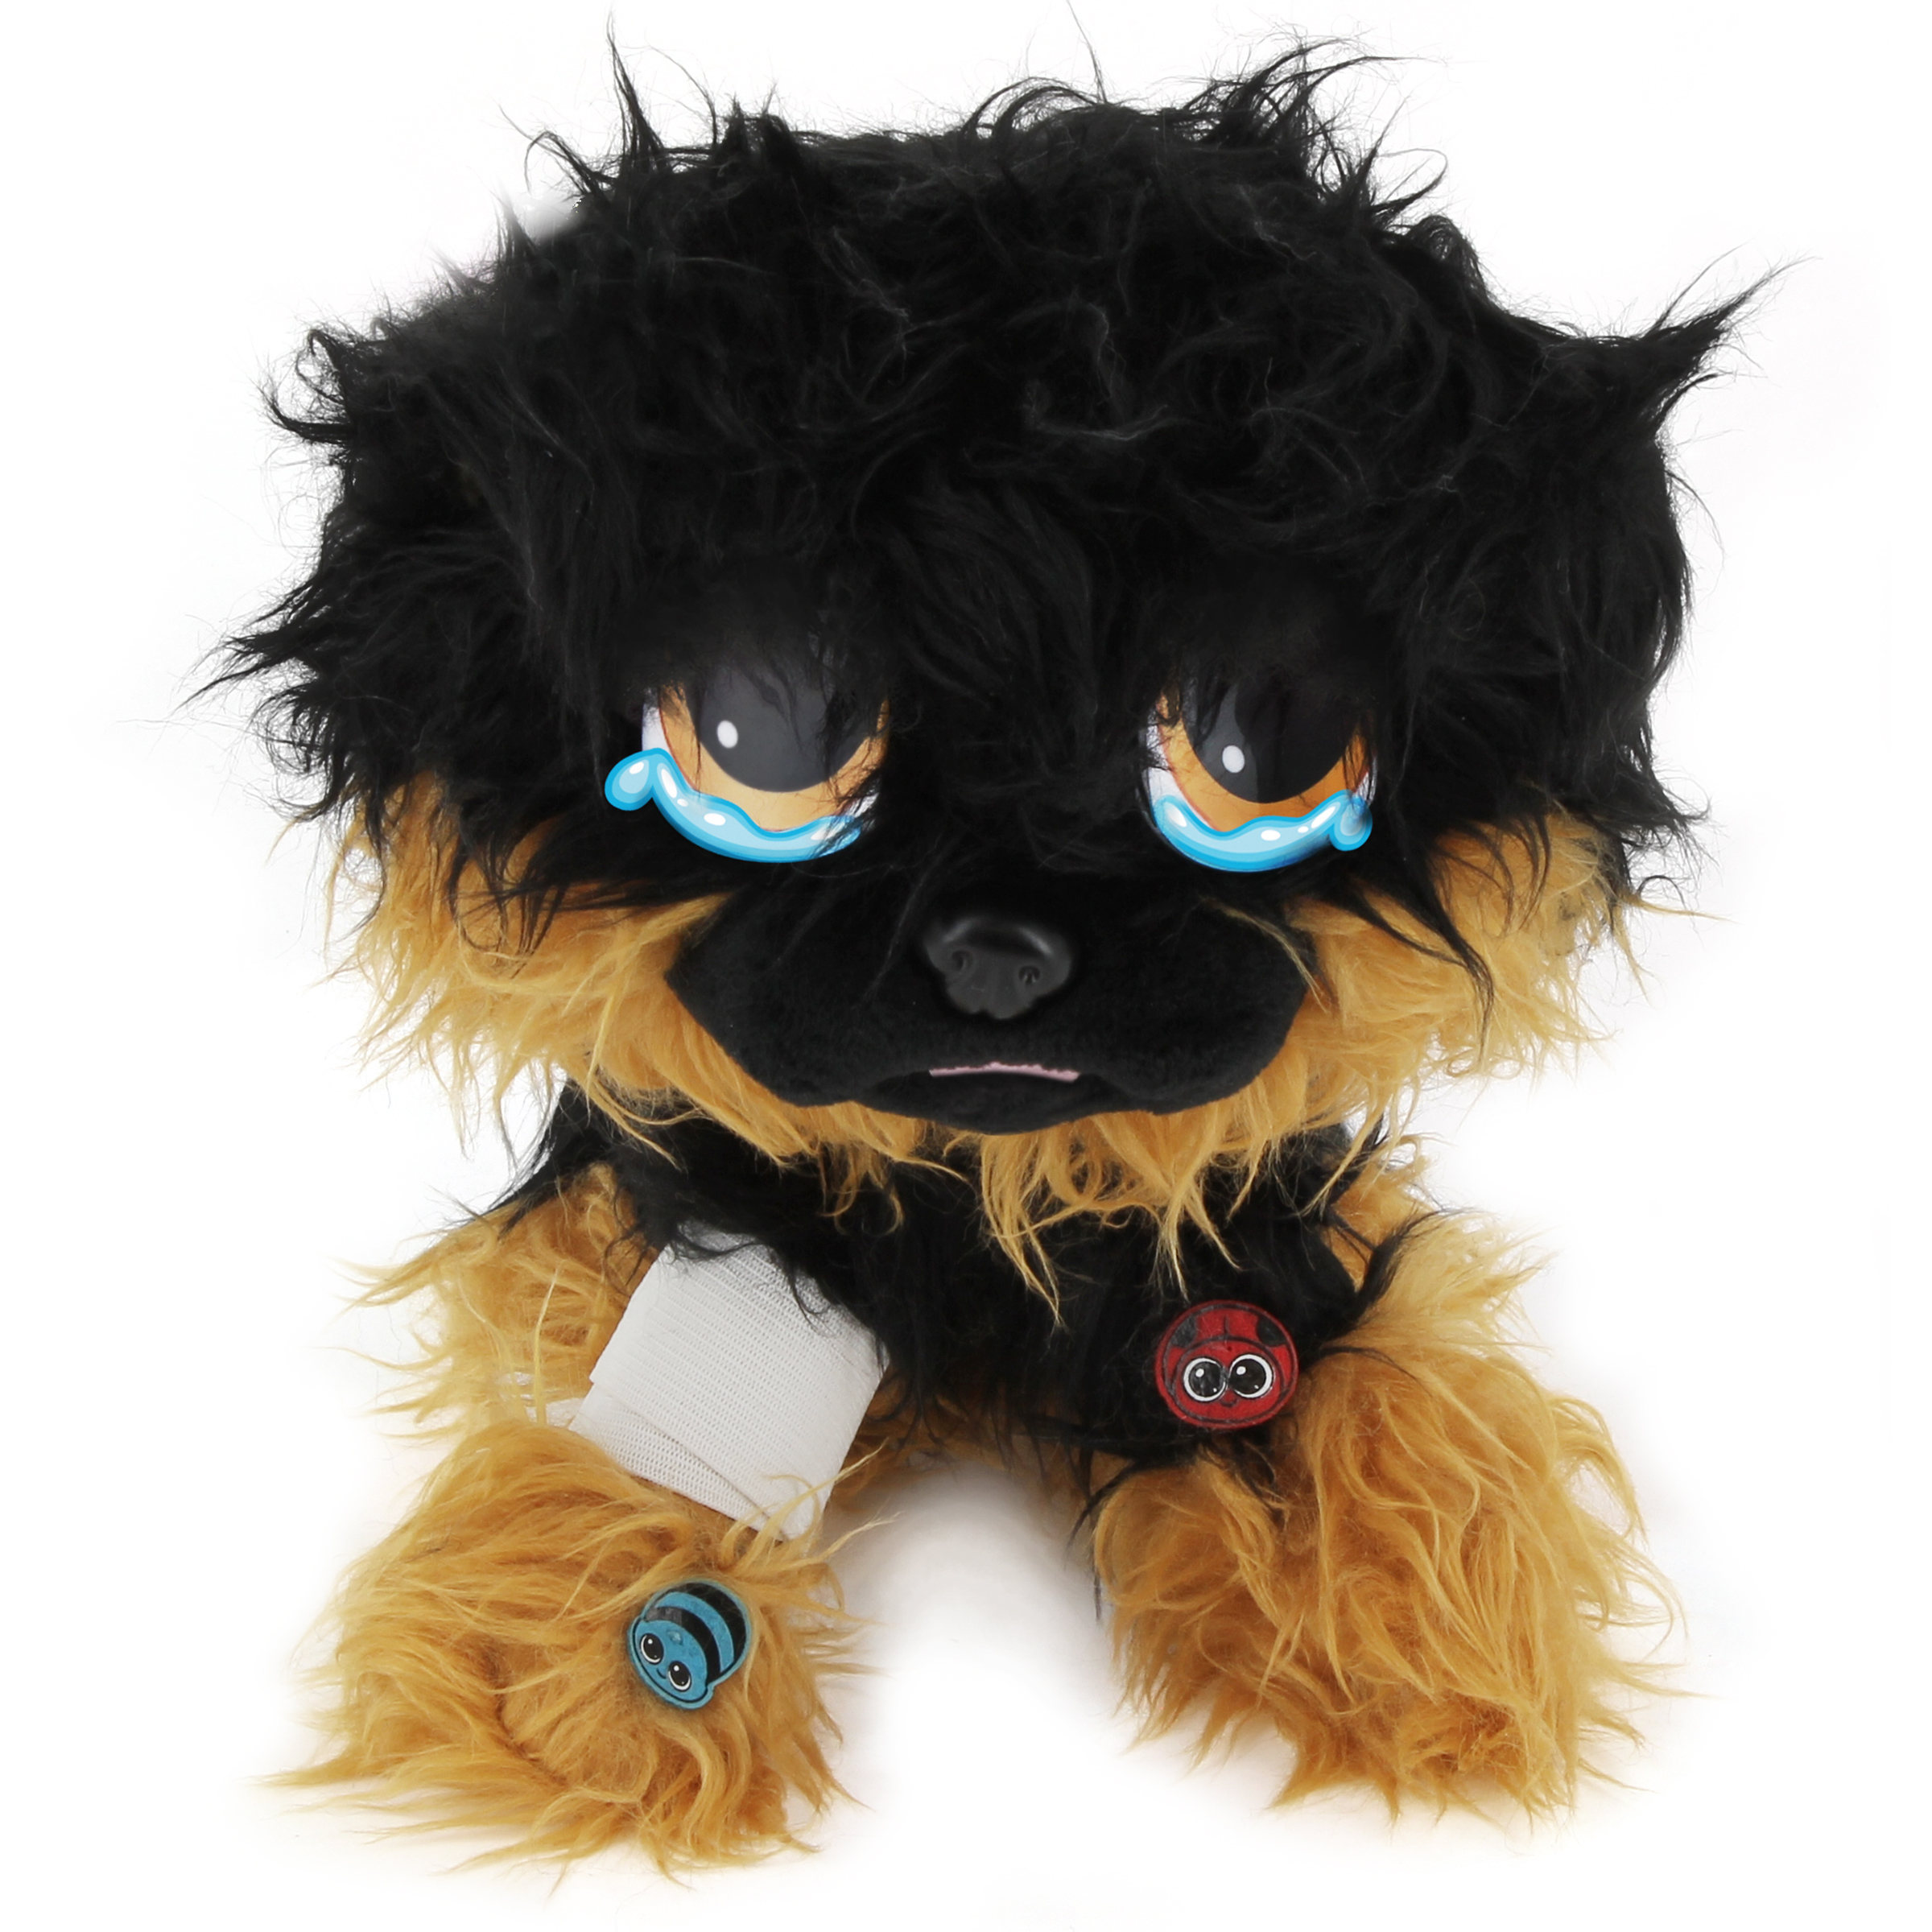 Rescue runts shepherd rescue dog plush by kd kids - image 5 of 8